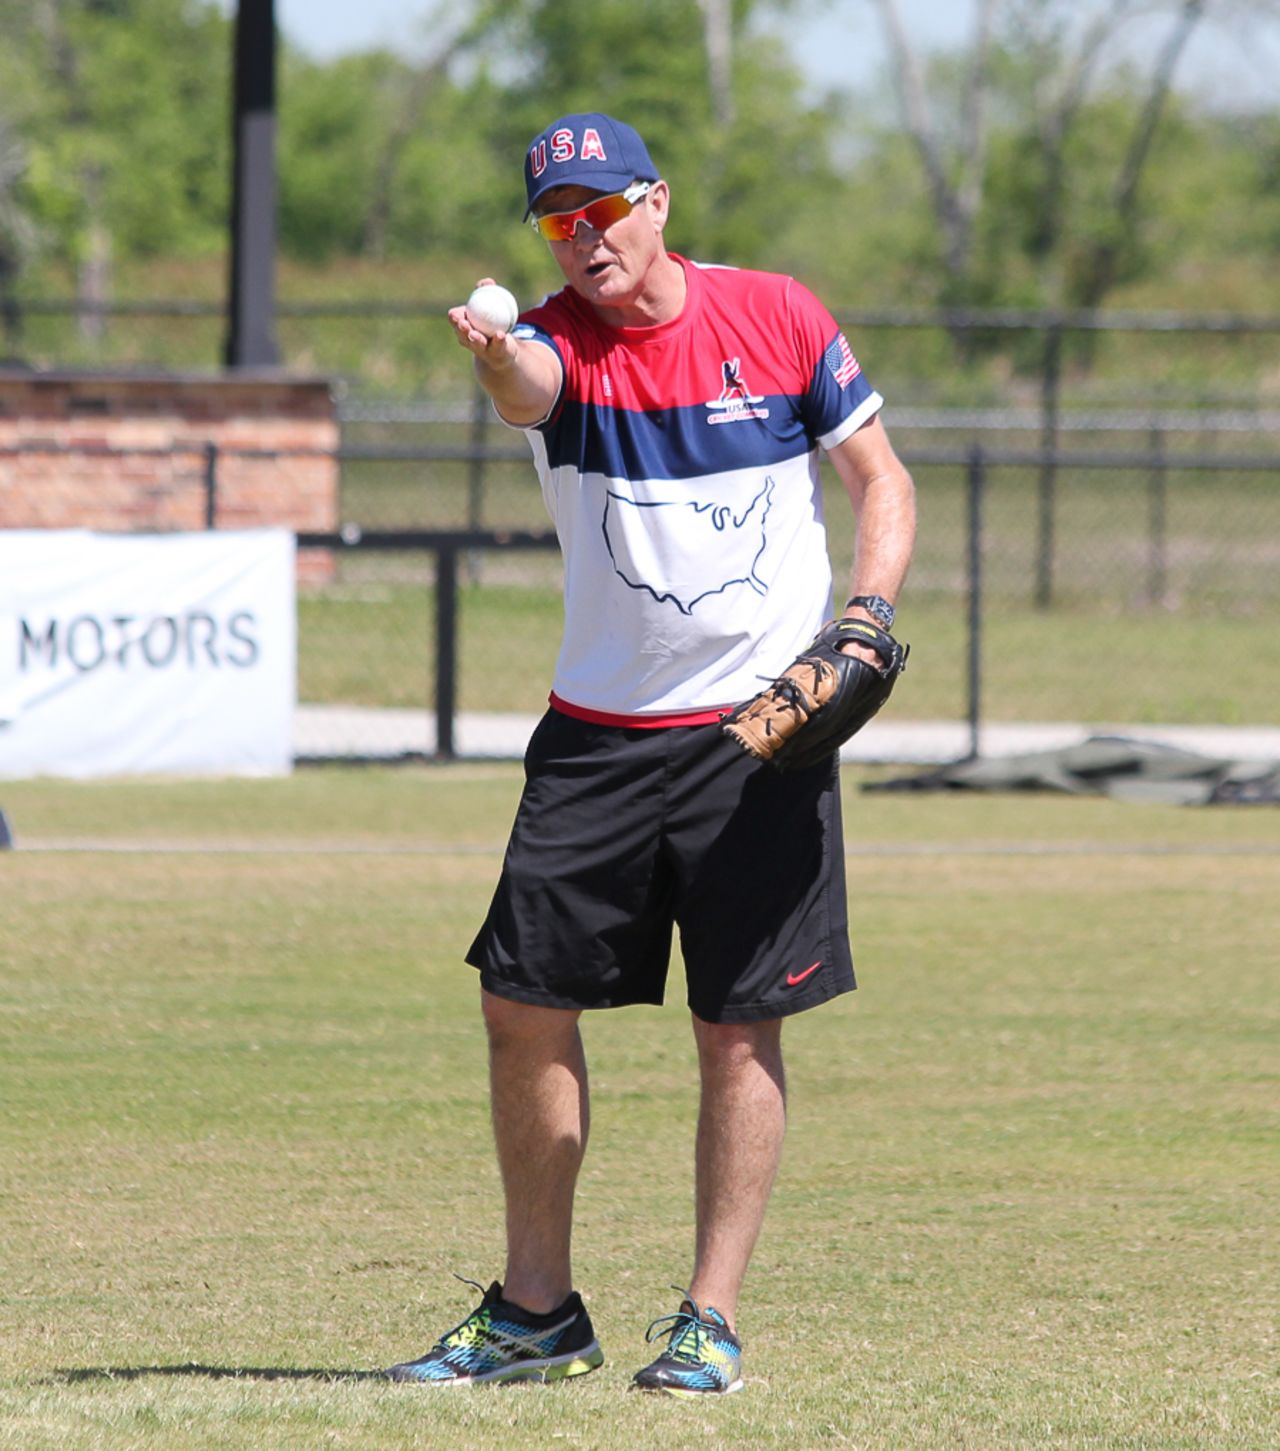 Trevor Penney gives some extra pointers during a fielding drill, Pearland, April 6, 2017